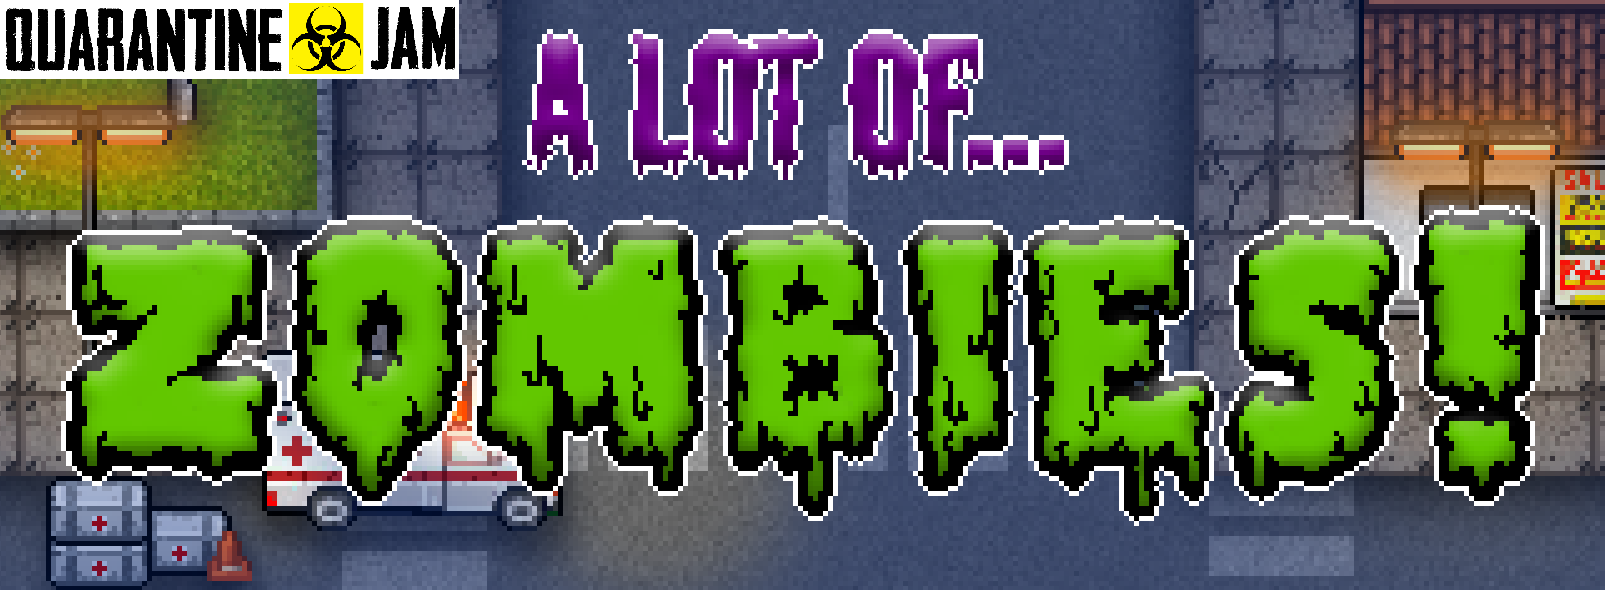 A lot of... zombies!